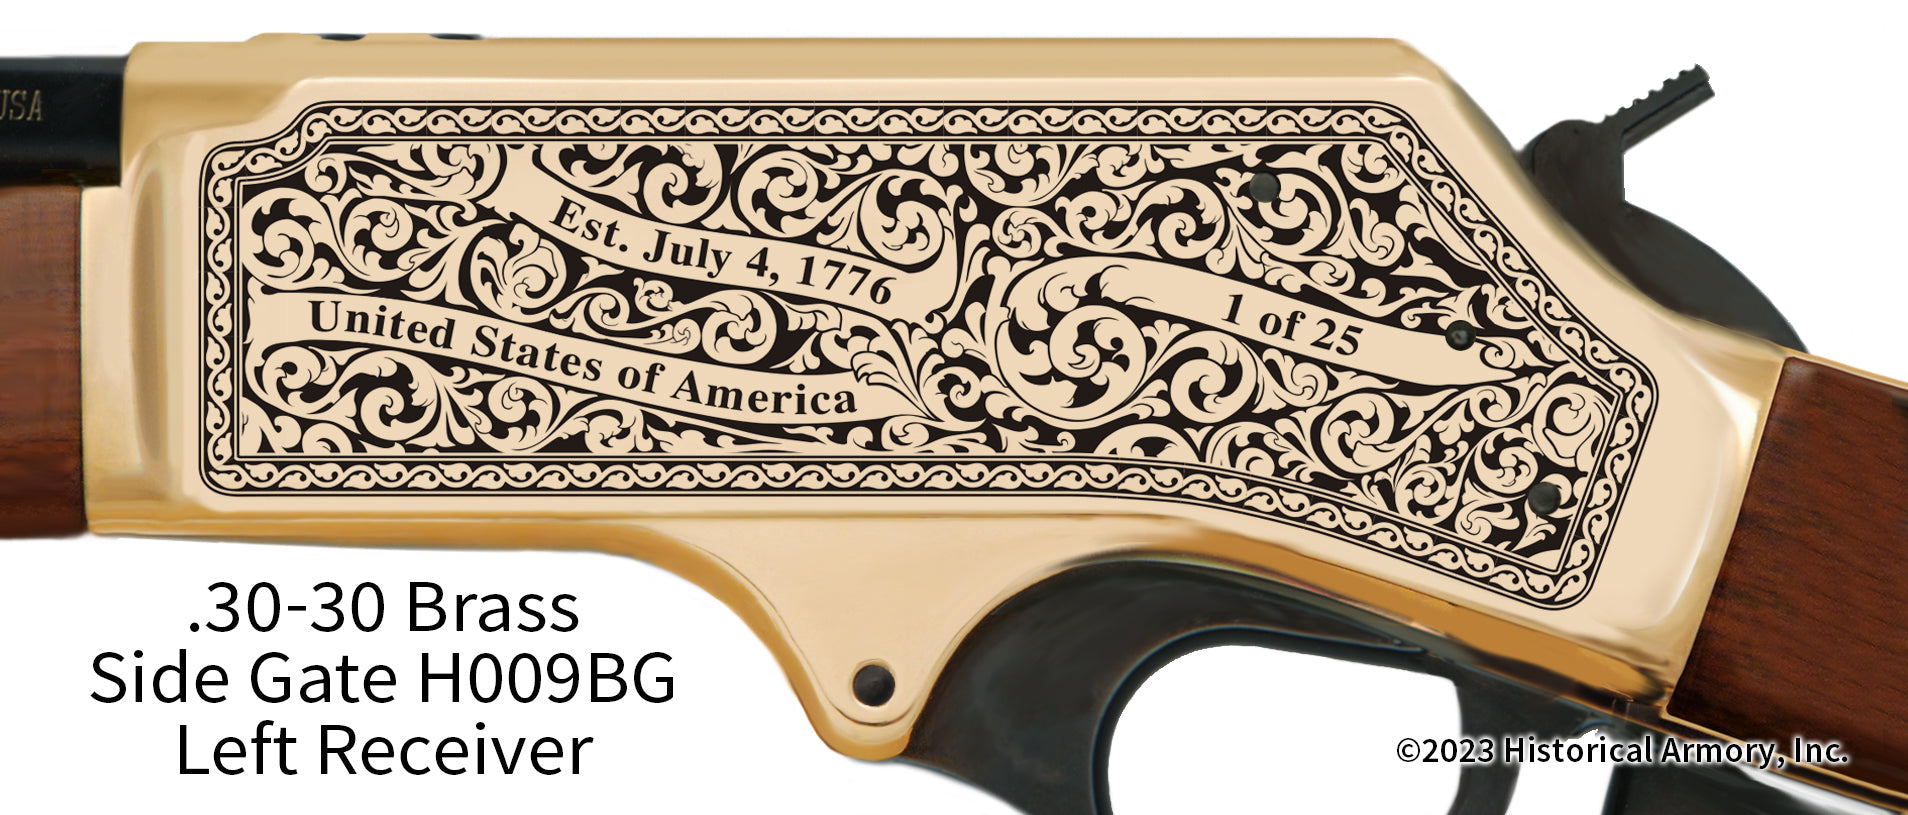 Braxton County West Virginia Engraved Henry .30-30 Brass Side Gate Rifle